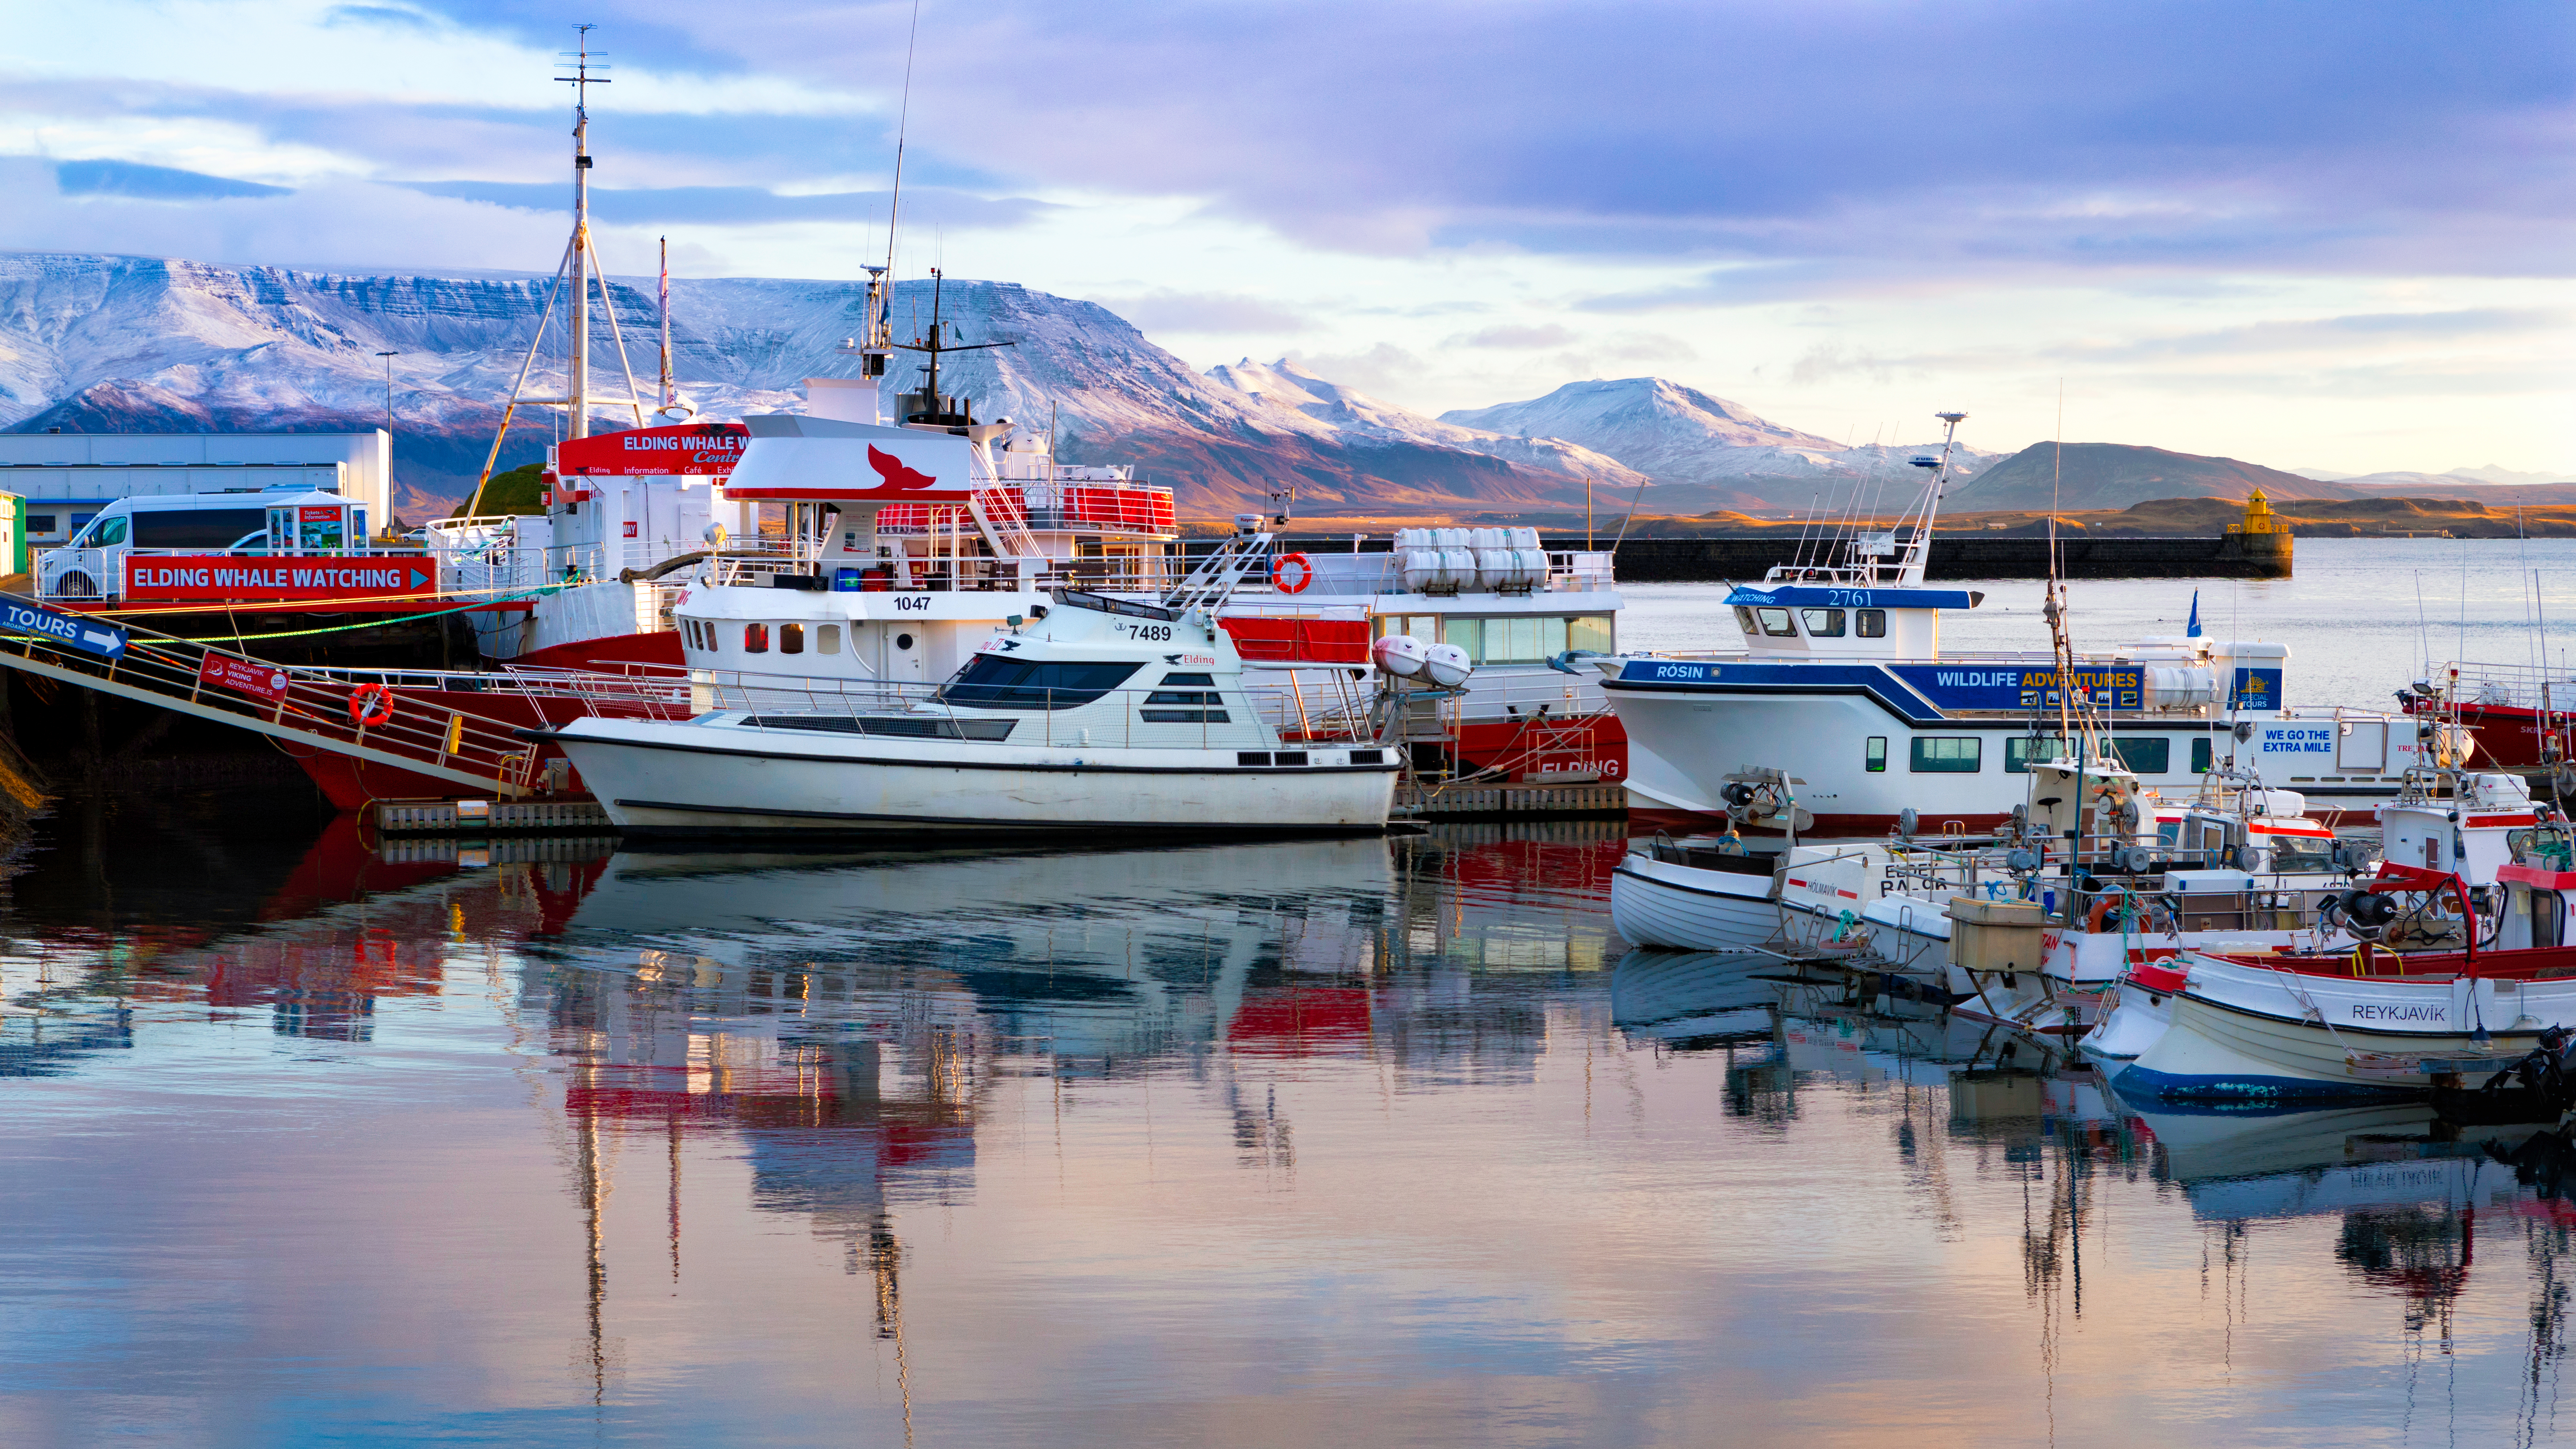 The Old Harbor of Reykjavik was built in 1917. Today it is a hub of fishing boats, whale watching tours and shops.